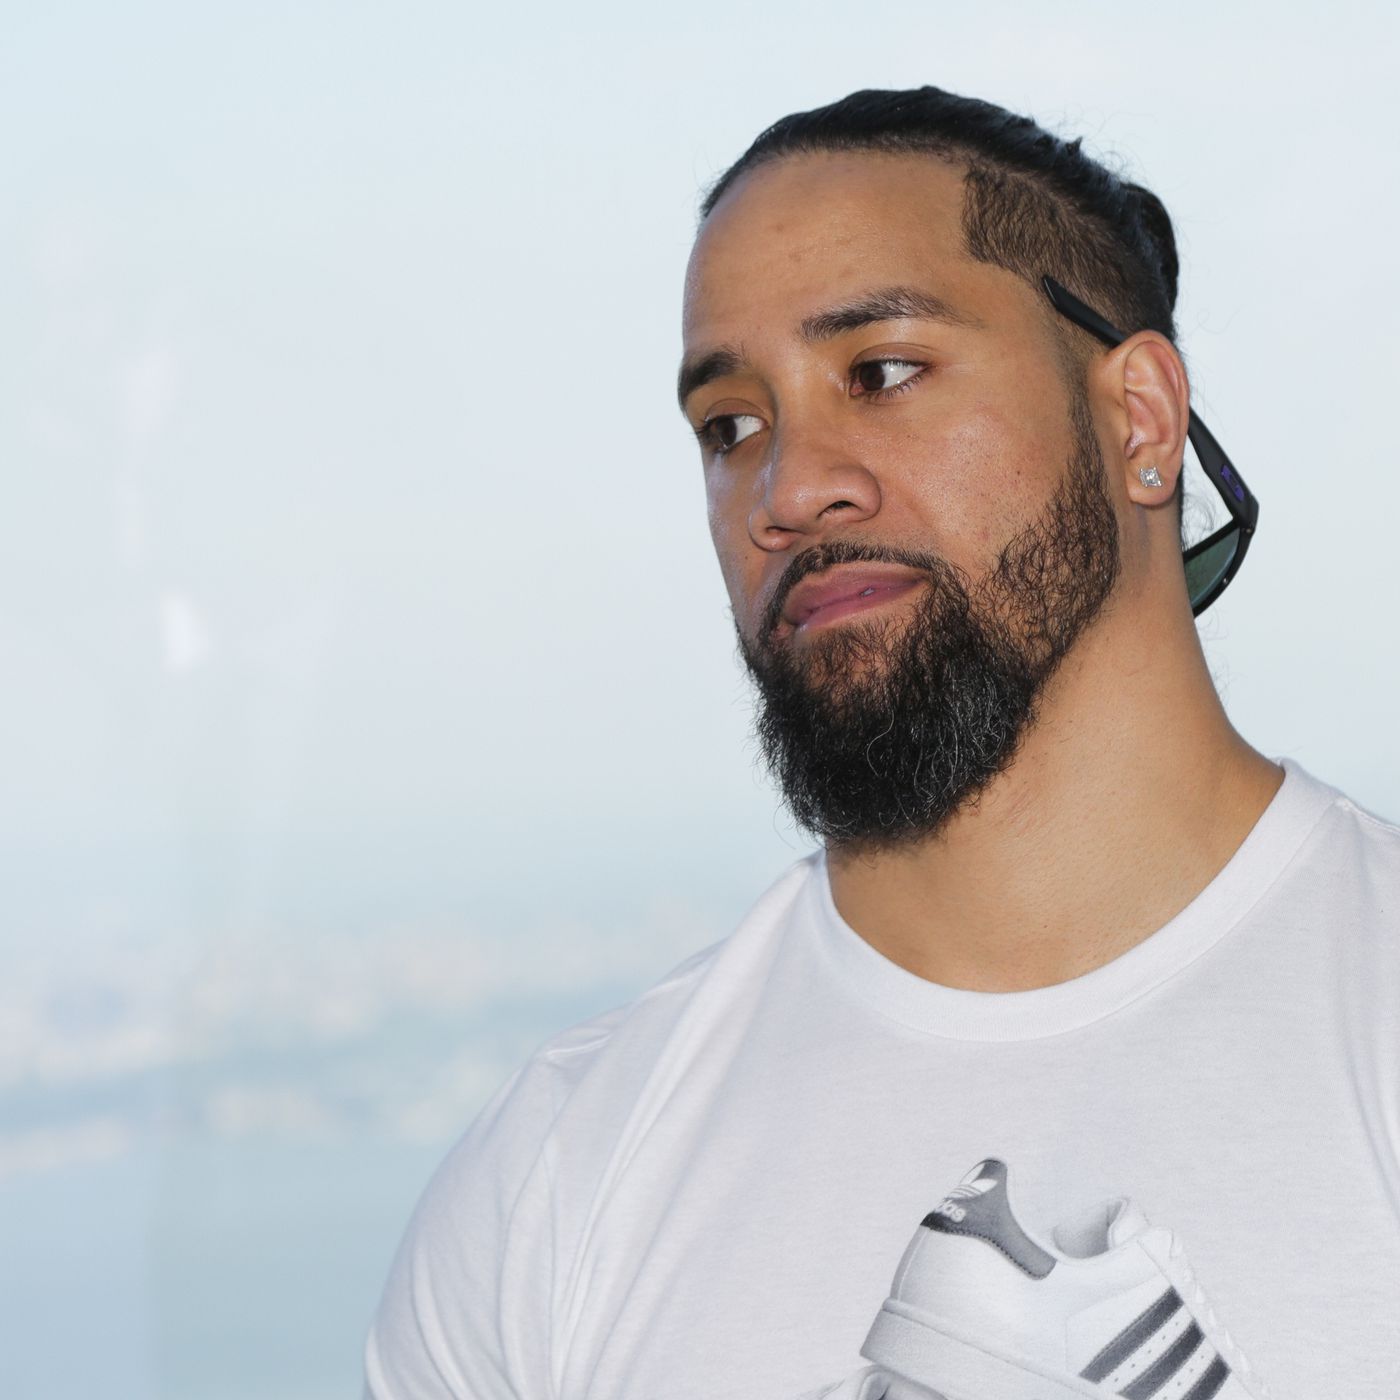 Jey Uso arrested in Texas for driving while intoxicated